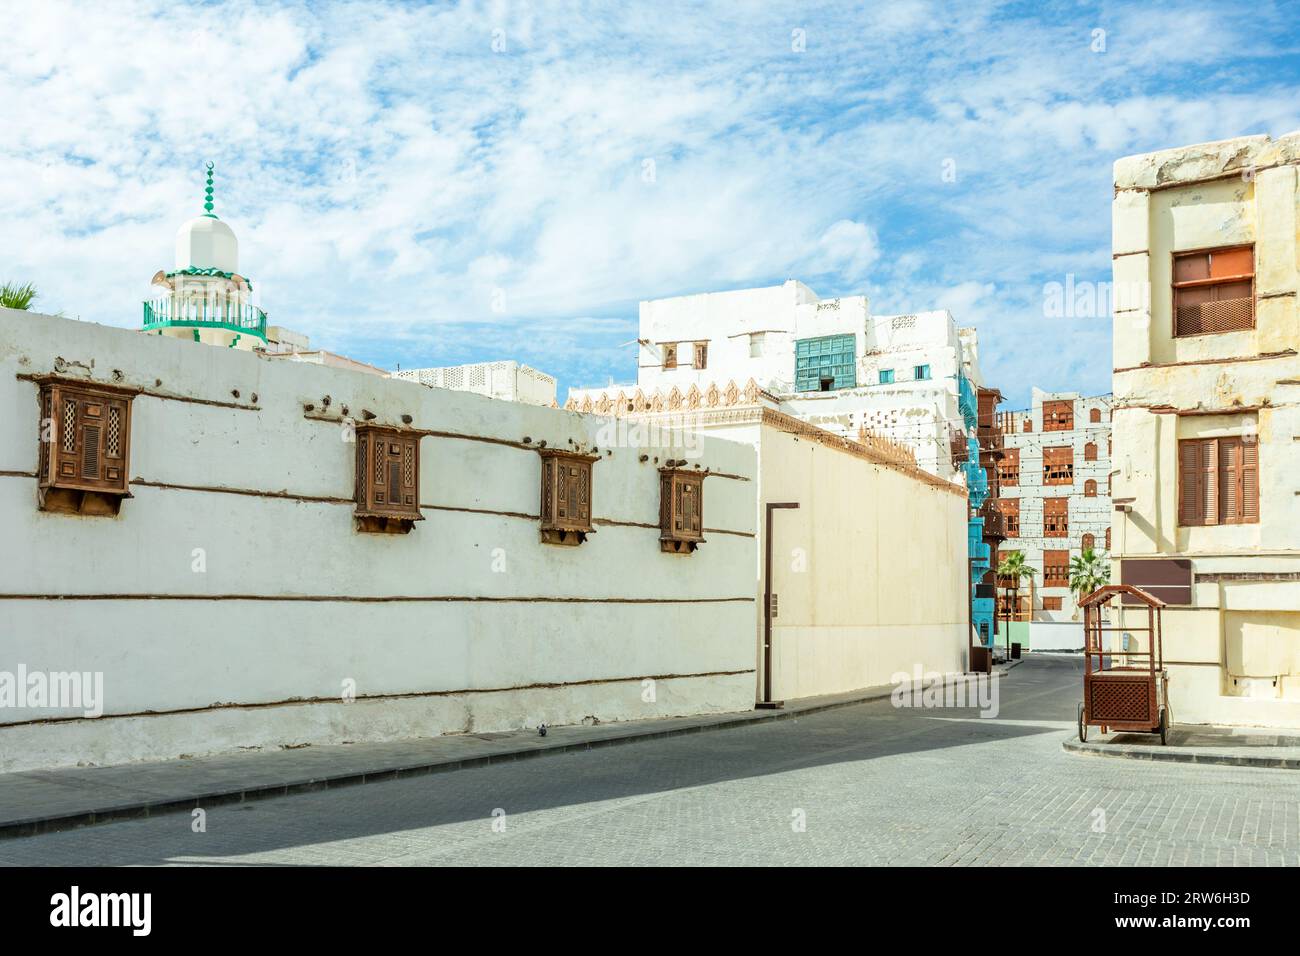 Al-Balad old town streets and  traditional muslim houses with wooden windows and balconies, Jeddah, Saudi Arabia Stock Photo